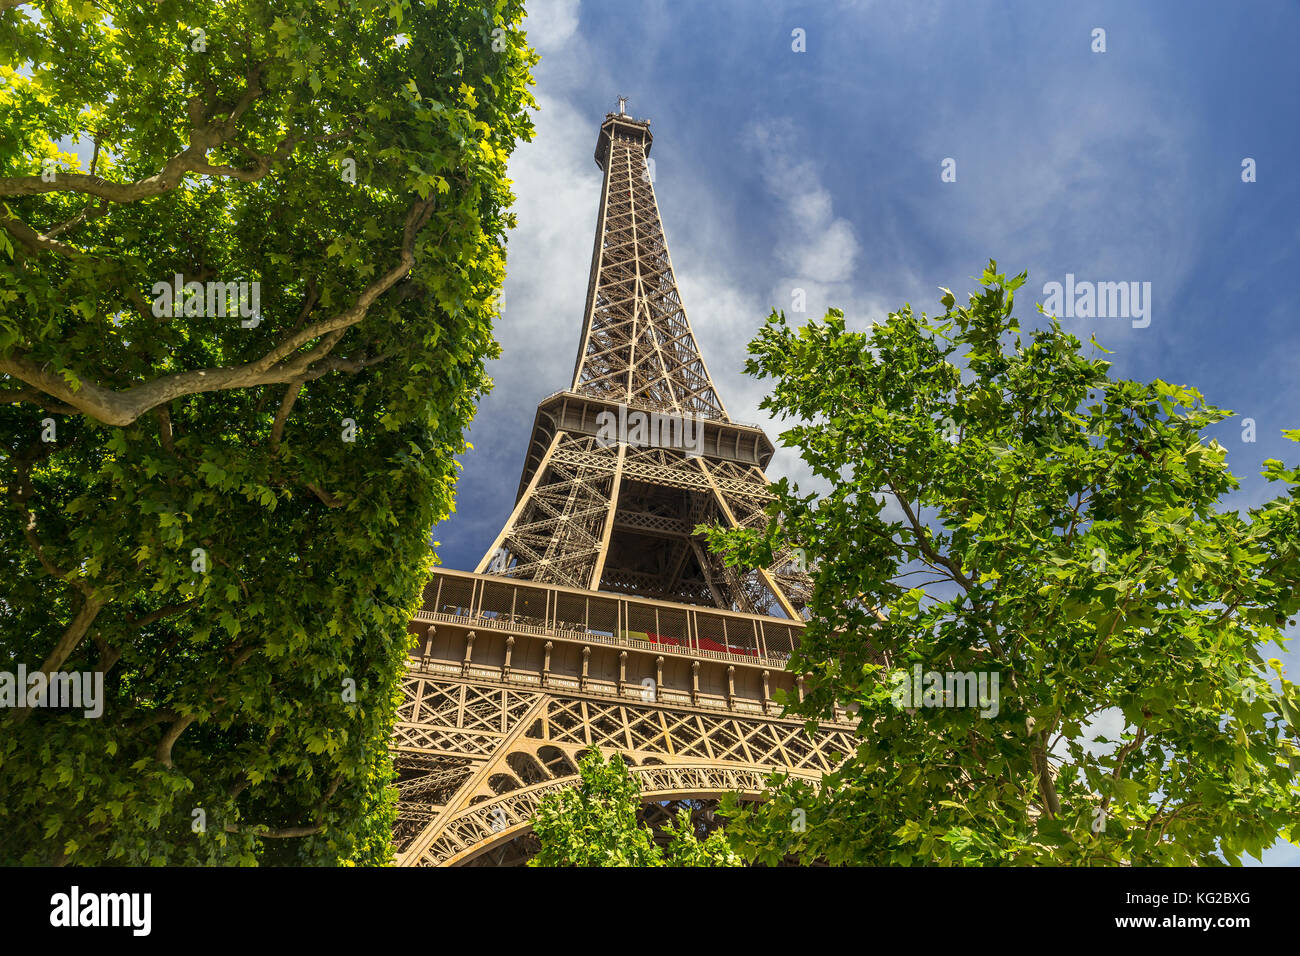 The most famous landmark in the world Stock Photo